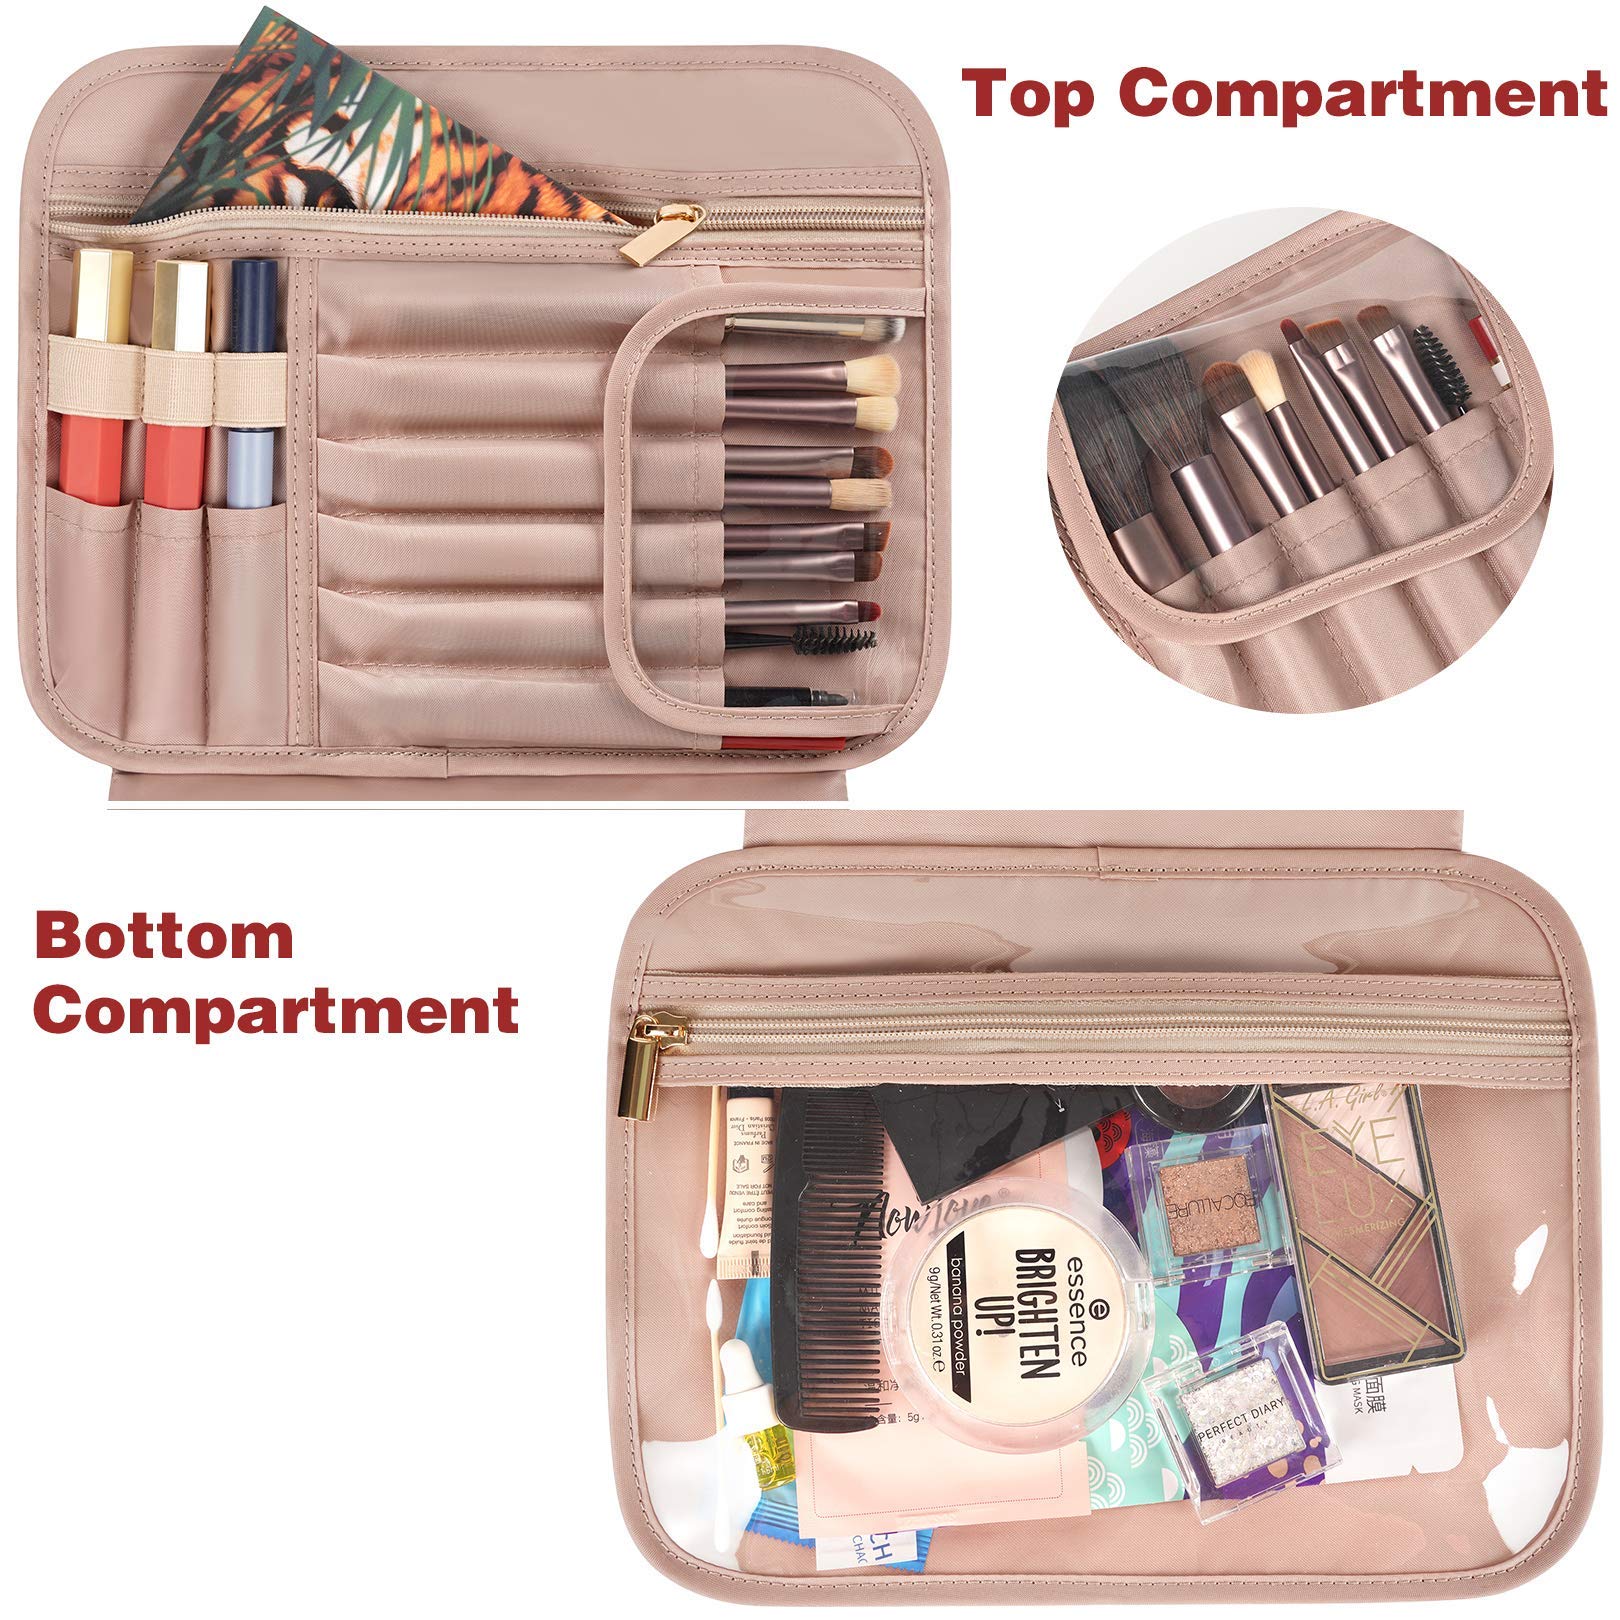 Toiletry Bag Hanging Travel Makeup Bag for Women Large Waterproof Cosmetic Bags Travel Organizer Full Sized Container with Elastic Band Holders for ToiletriesCosmetics